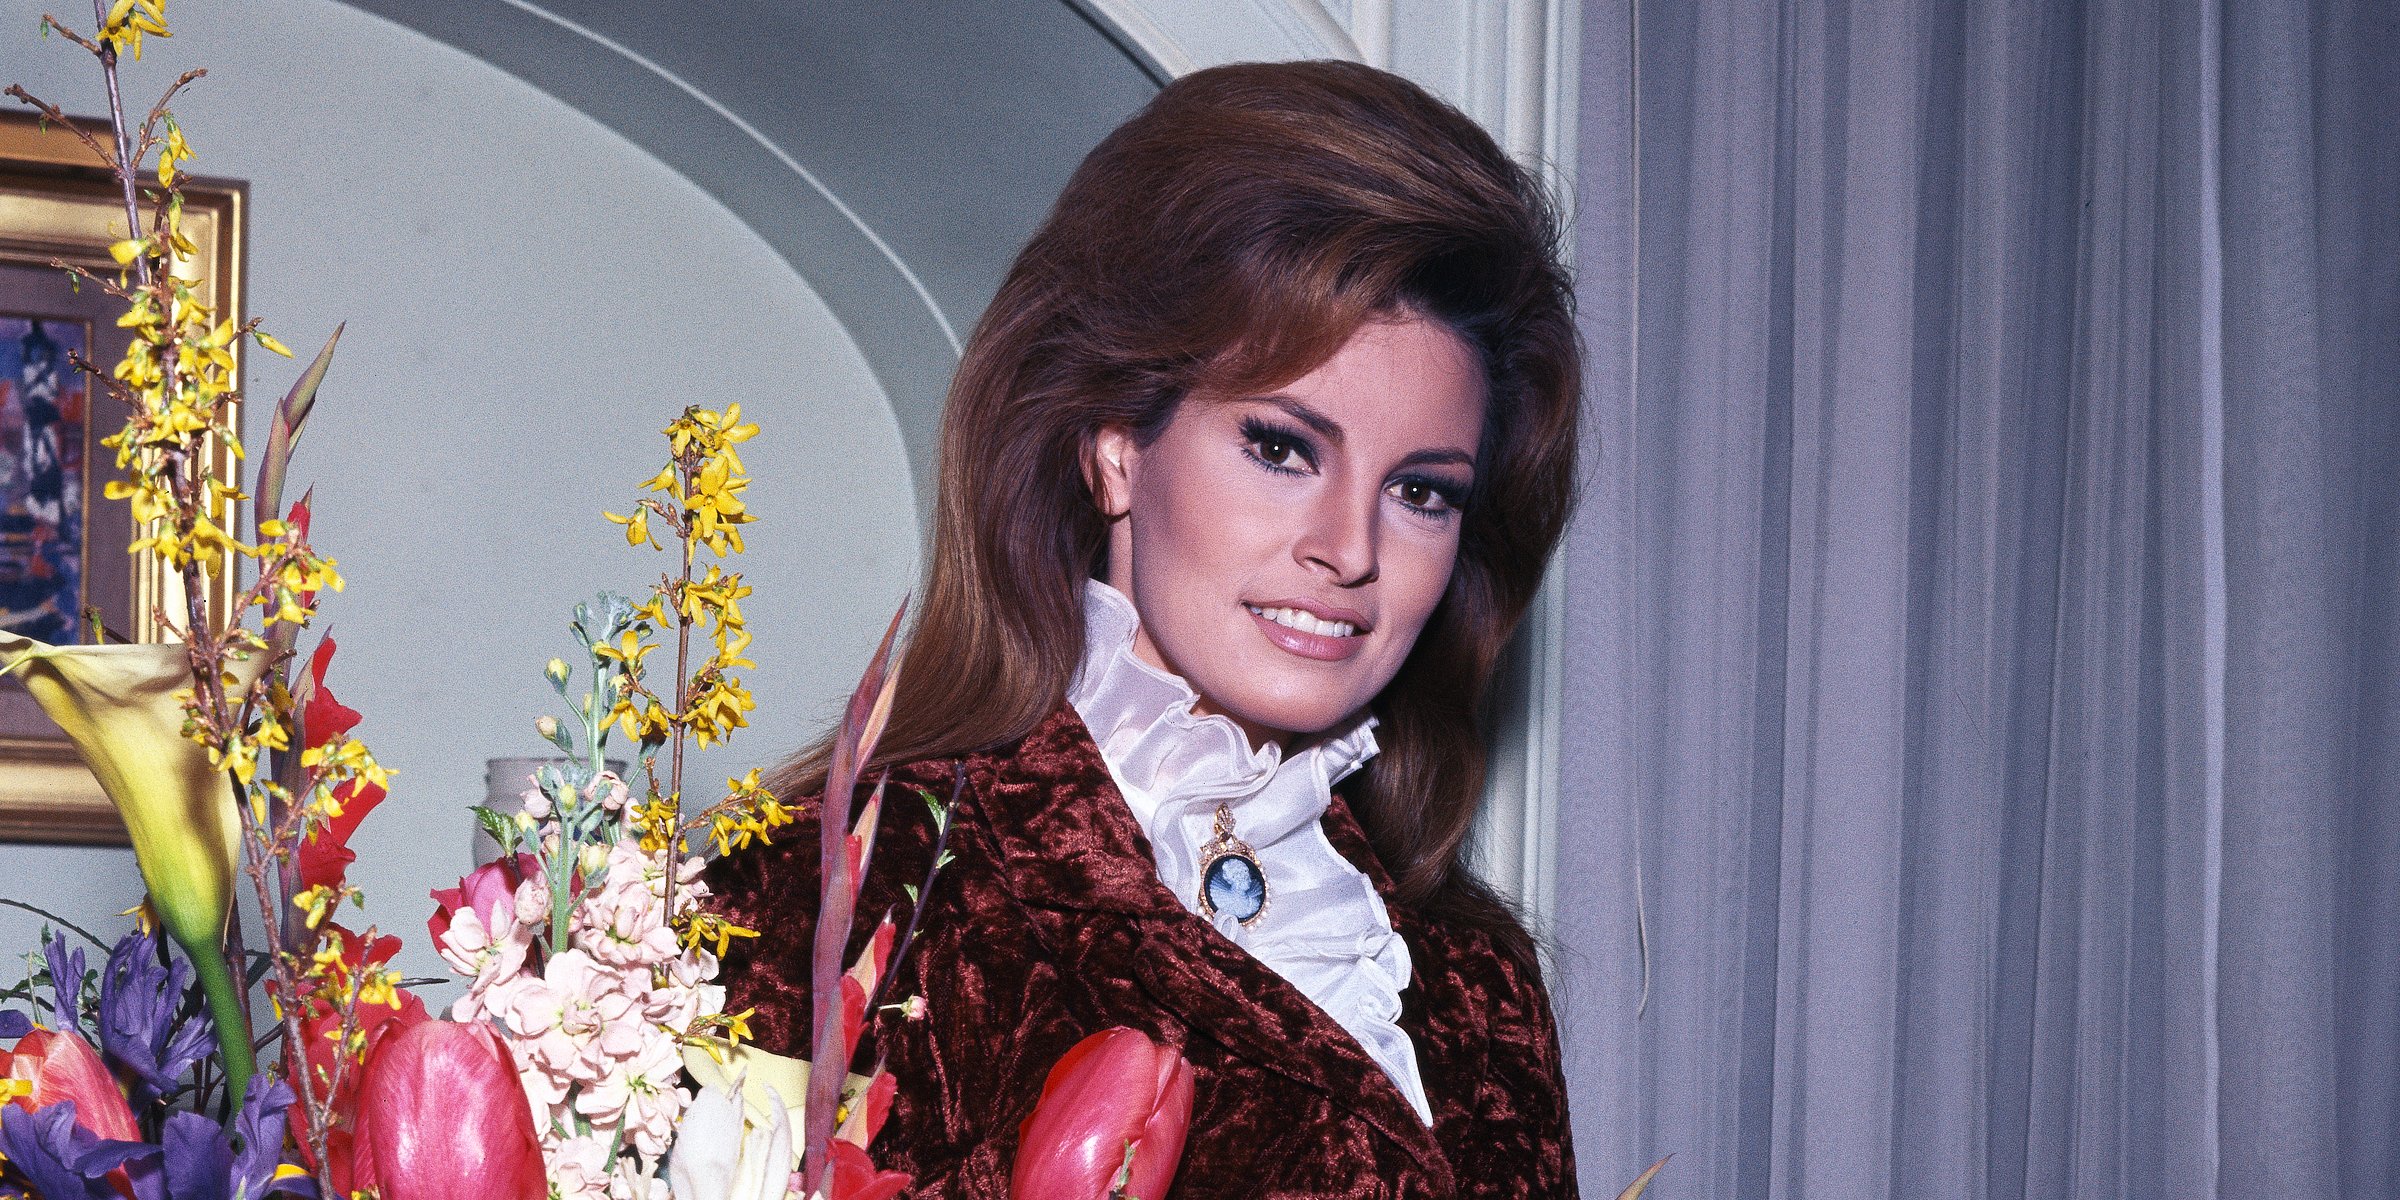 Raquel Welch | Source: Getty Images